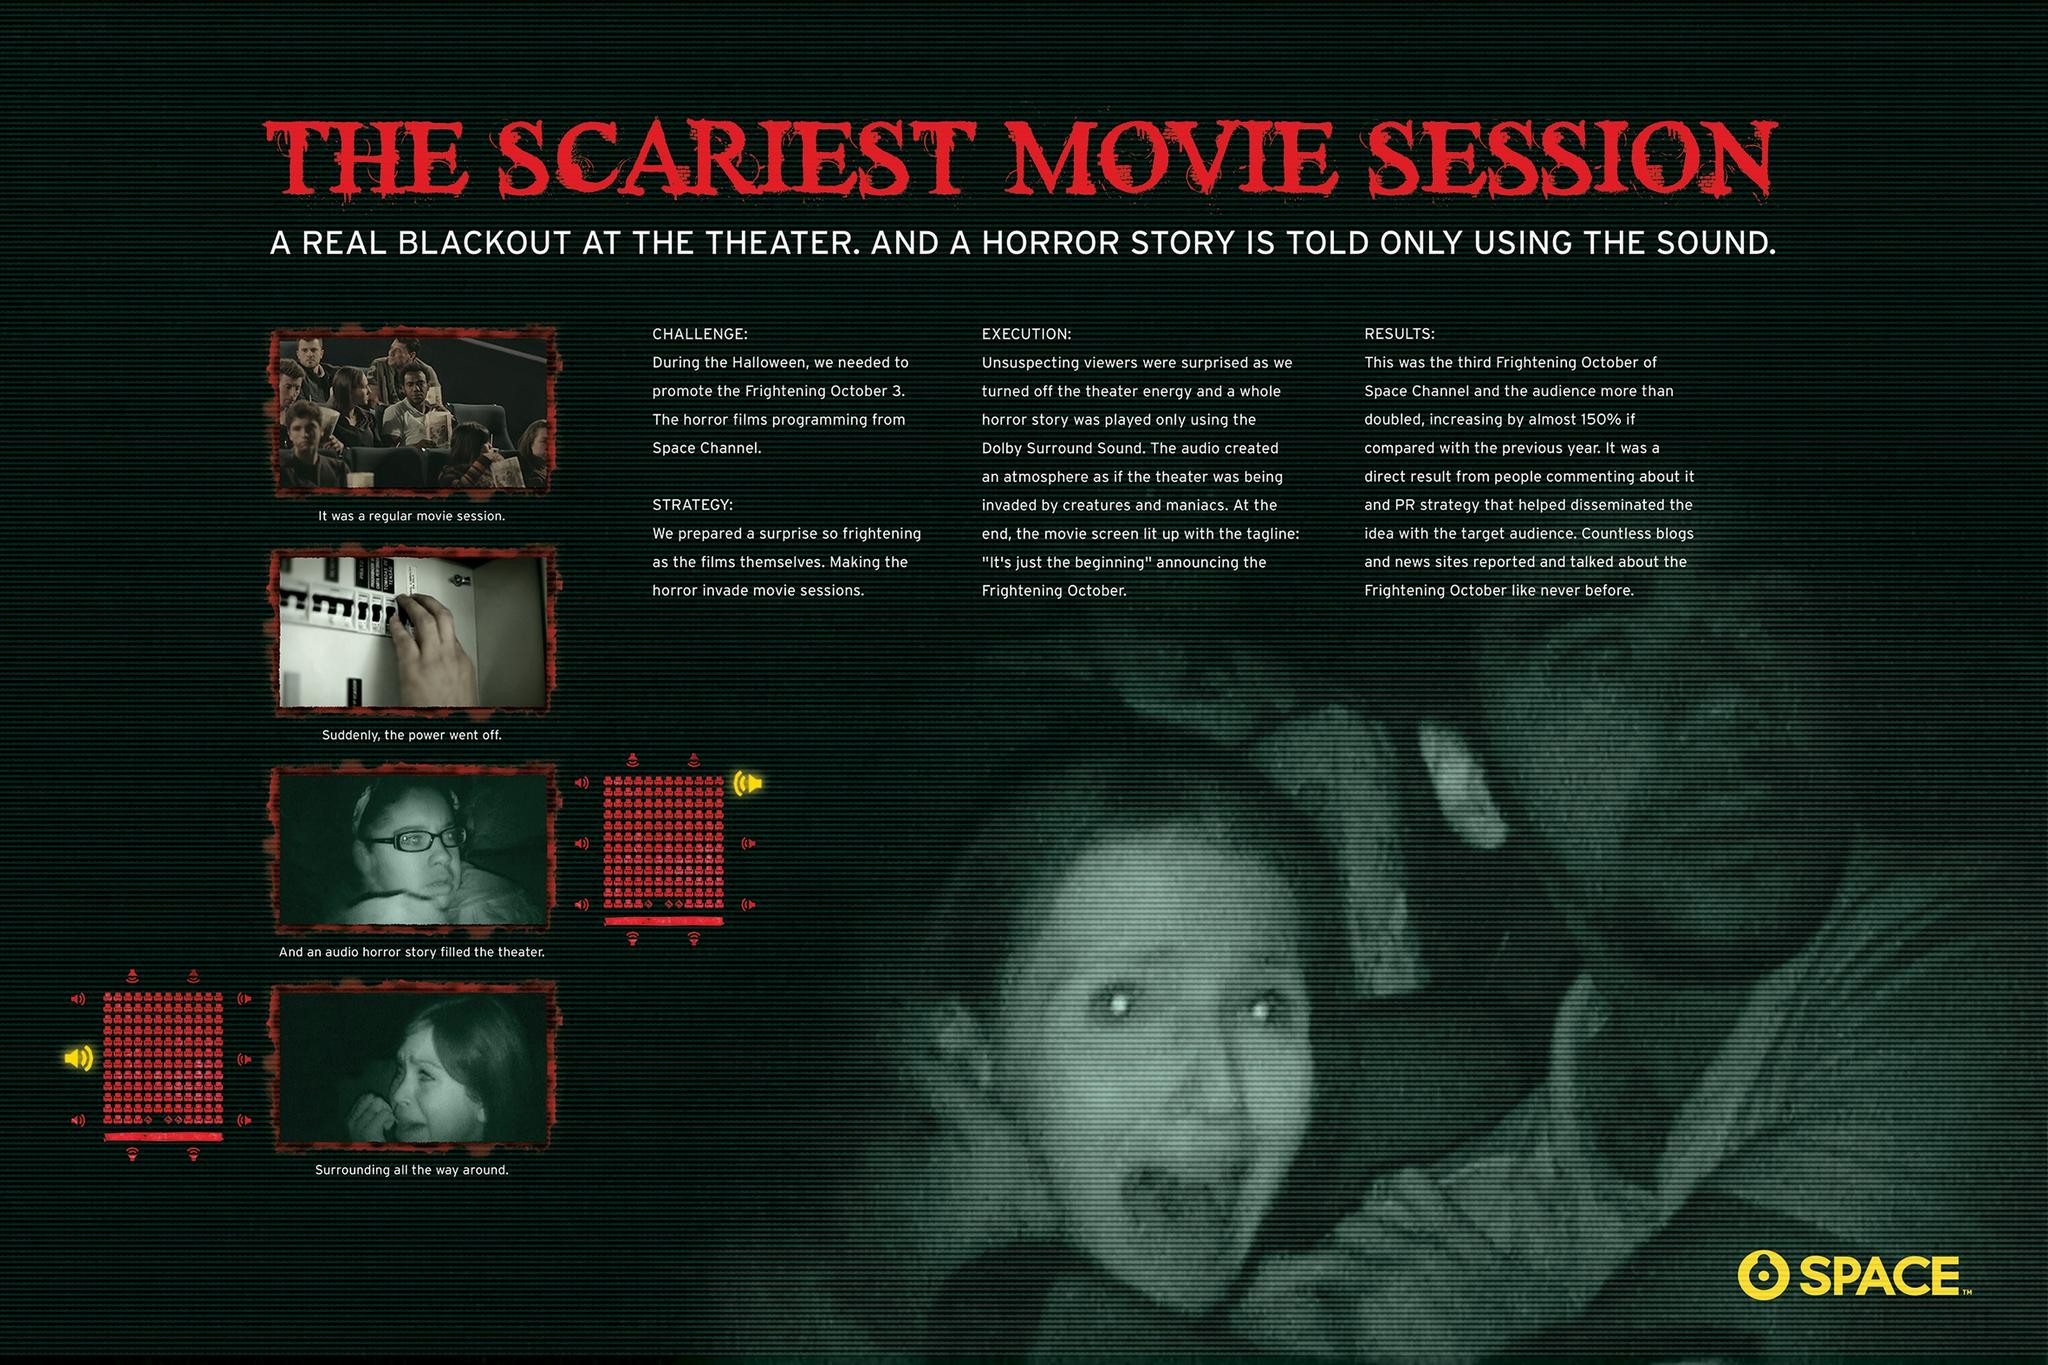 THE SCARIEST MOVIE SESSION